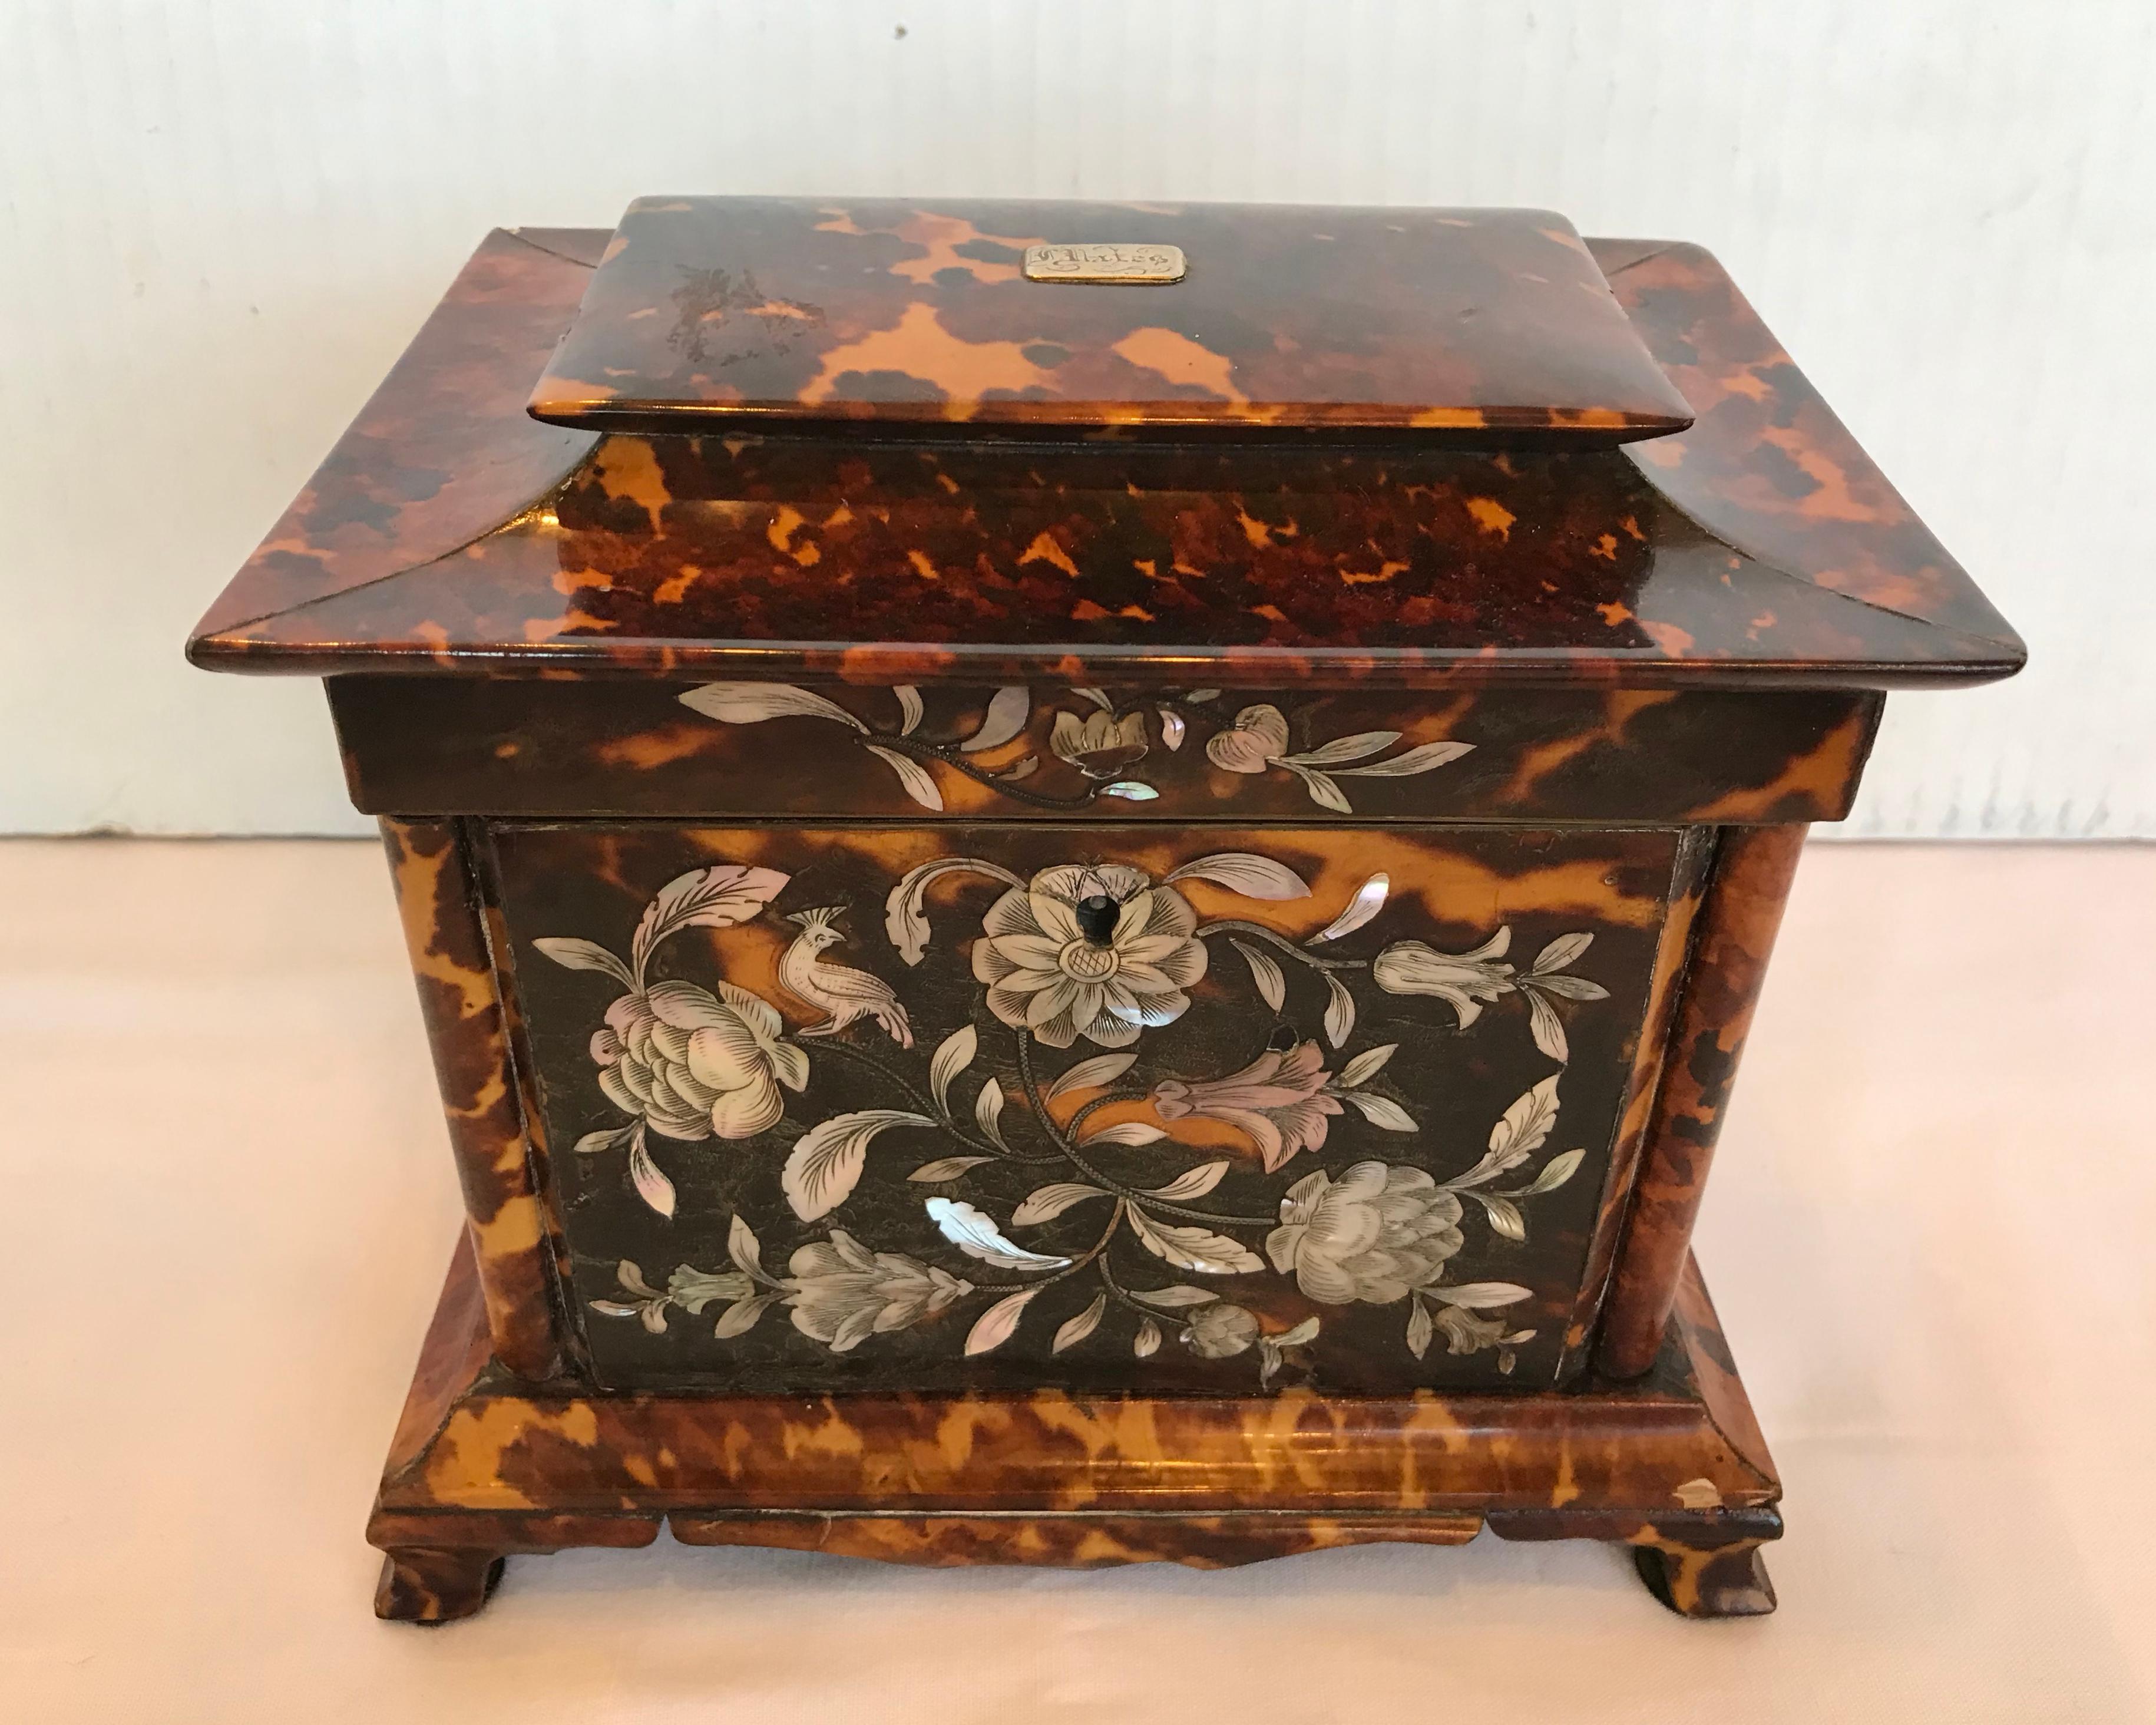 Absolutely fabulous! A stately caddy with fine mother of pearl floral inlays accented with a
Bird of paradise. Quite an unusual form and scale. The caddy is raised upon bracket feet
And is fashioned with columns on each side of its front and back.